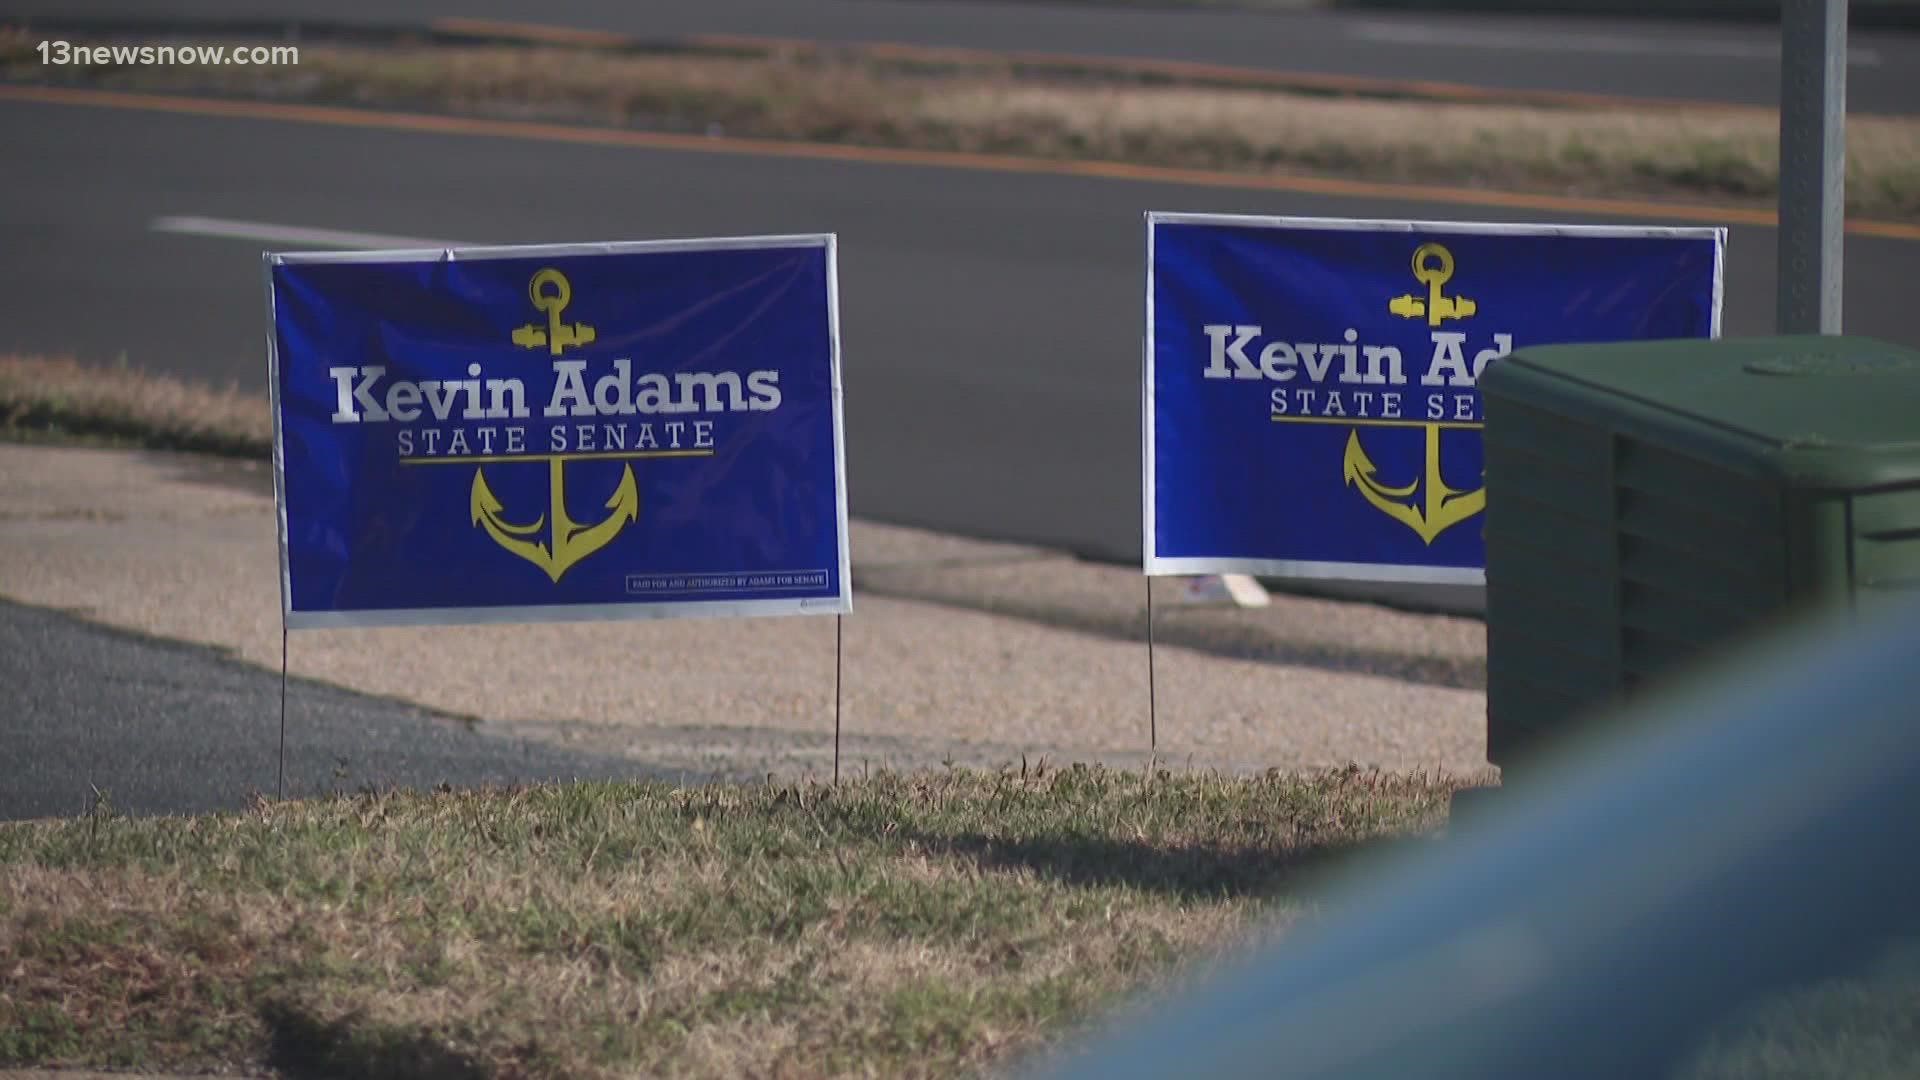 Virginia Beach City Councilman Aaron Rouse and Navy veteran Kevin Adams are vying for Virginia's 7th District Senate seat.